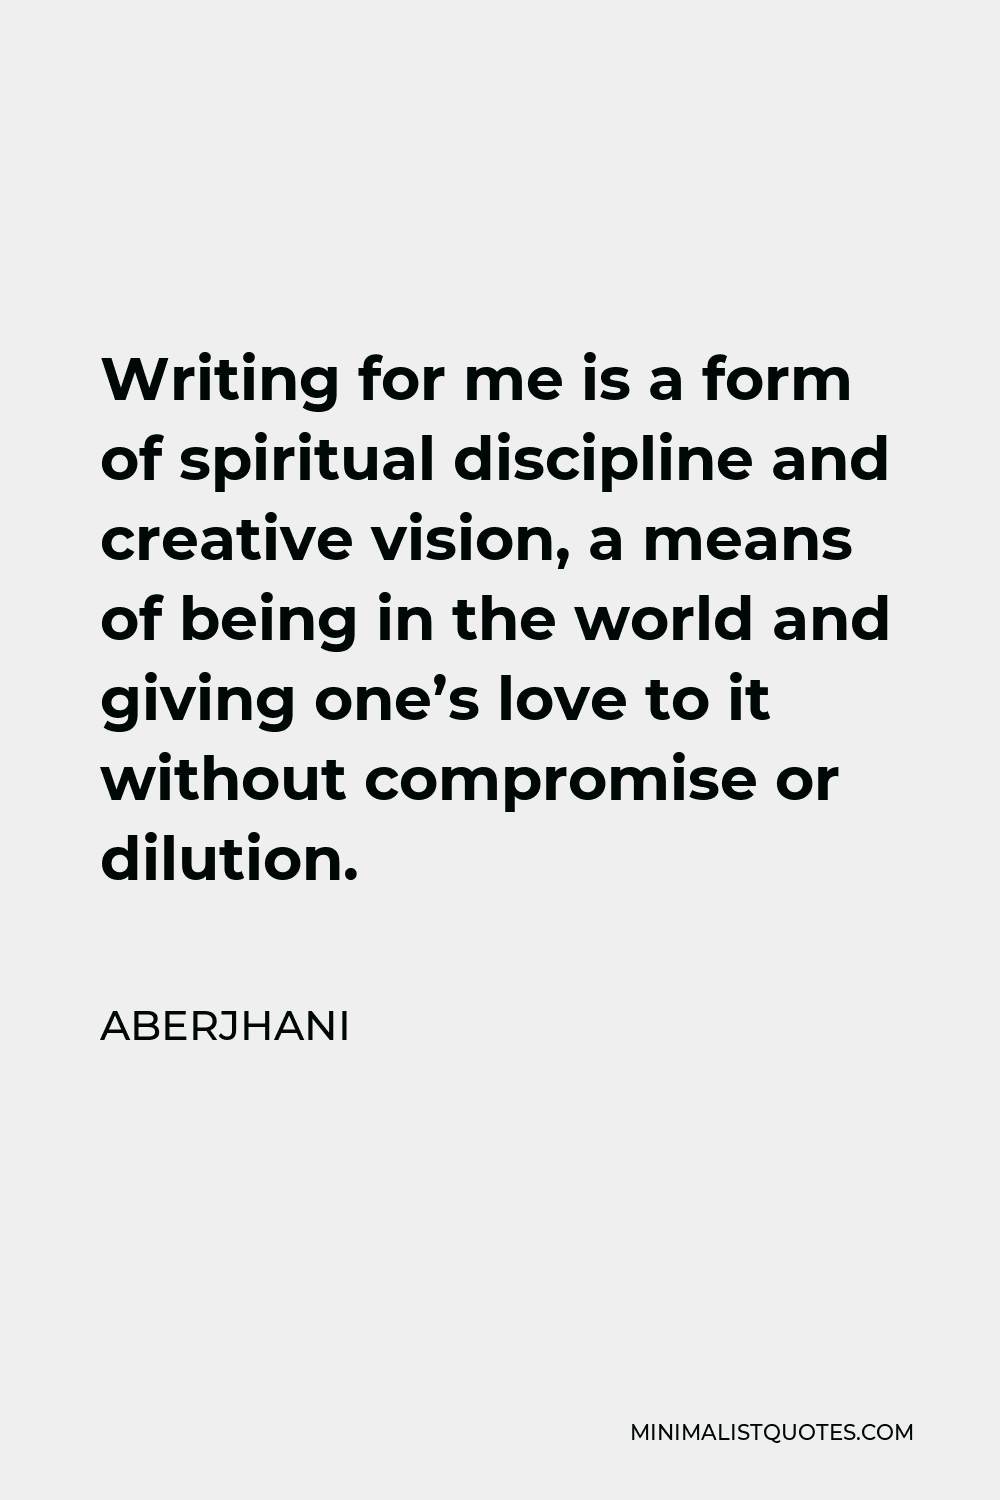 Aberjhani Quote - Writing for me is a form of spiritual discipline and creative vision, a means of being in the world and giving one’s love to it without compromise or dilution.